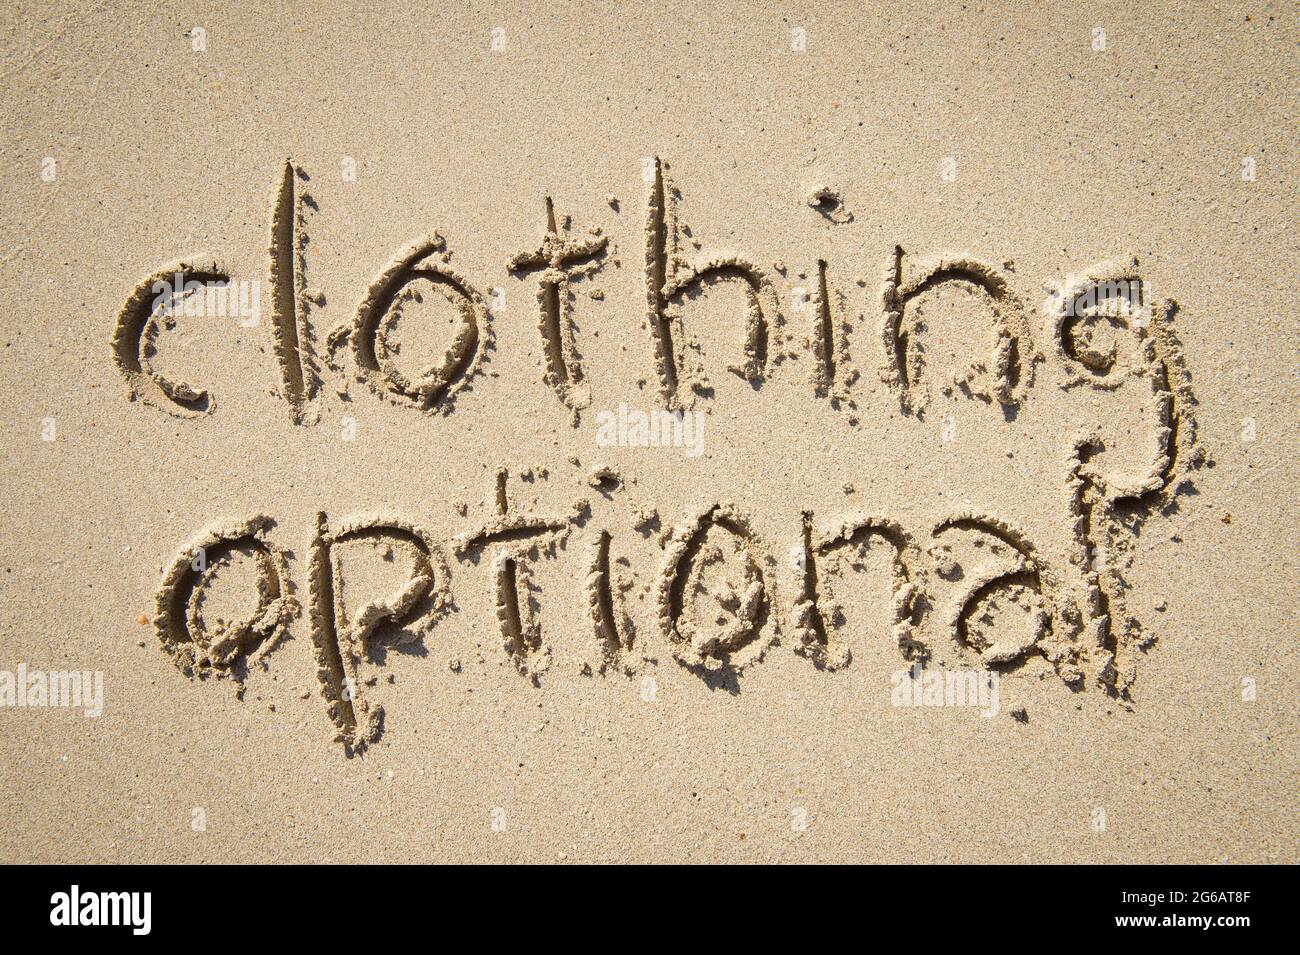 Clothing optional nudist message handwritten in simple text on smooth sand beach Stock Photo